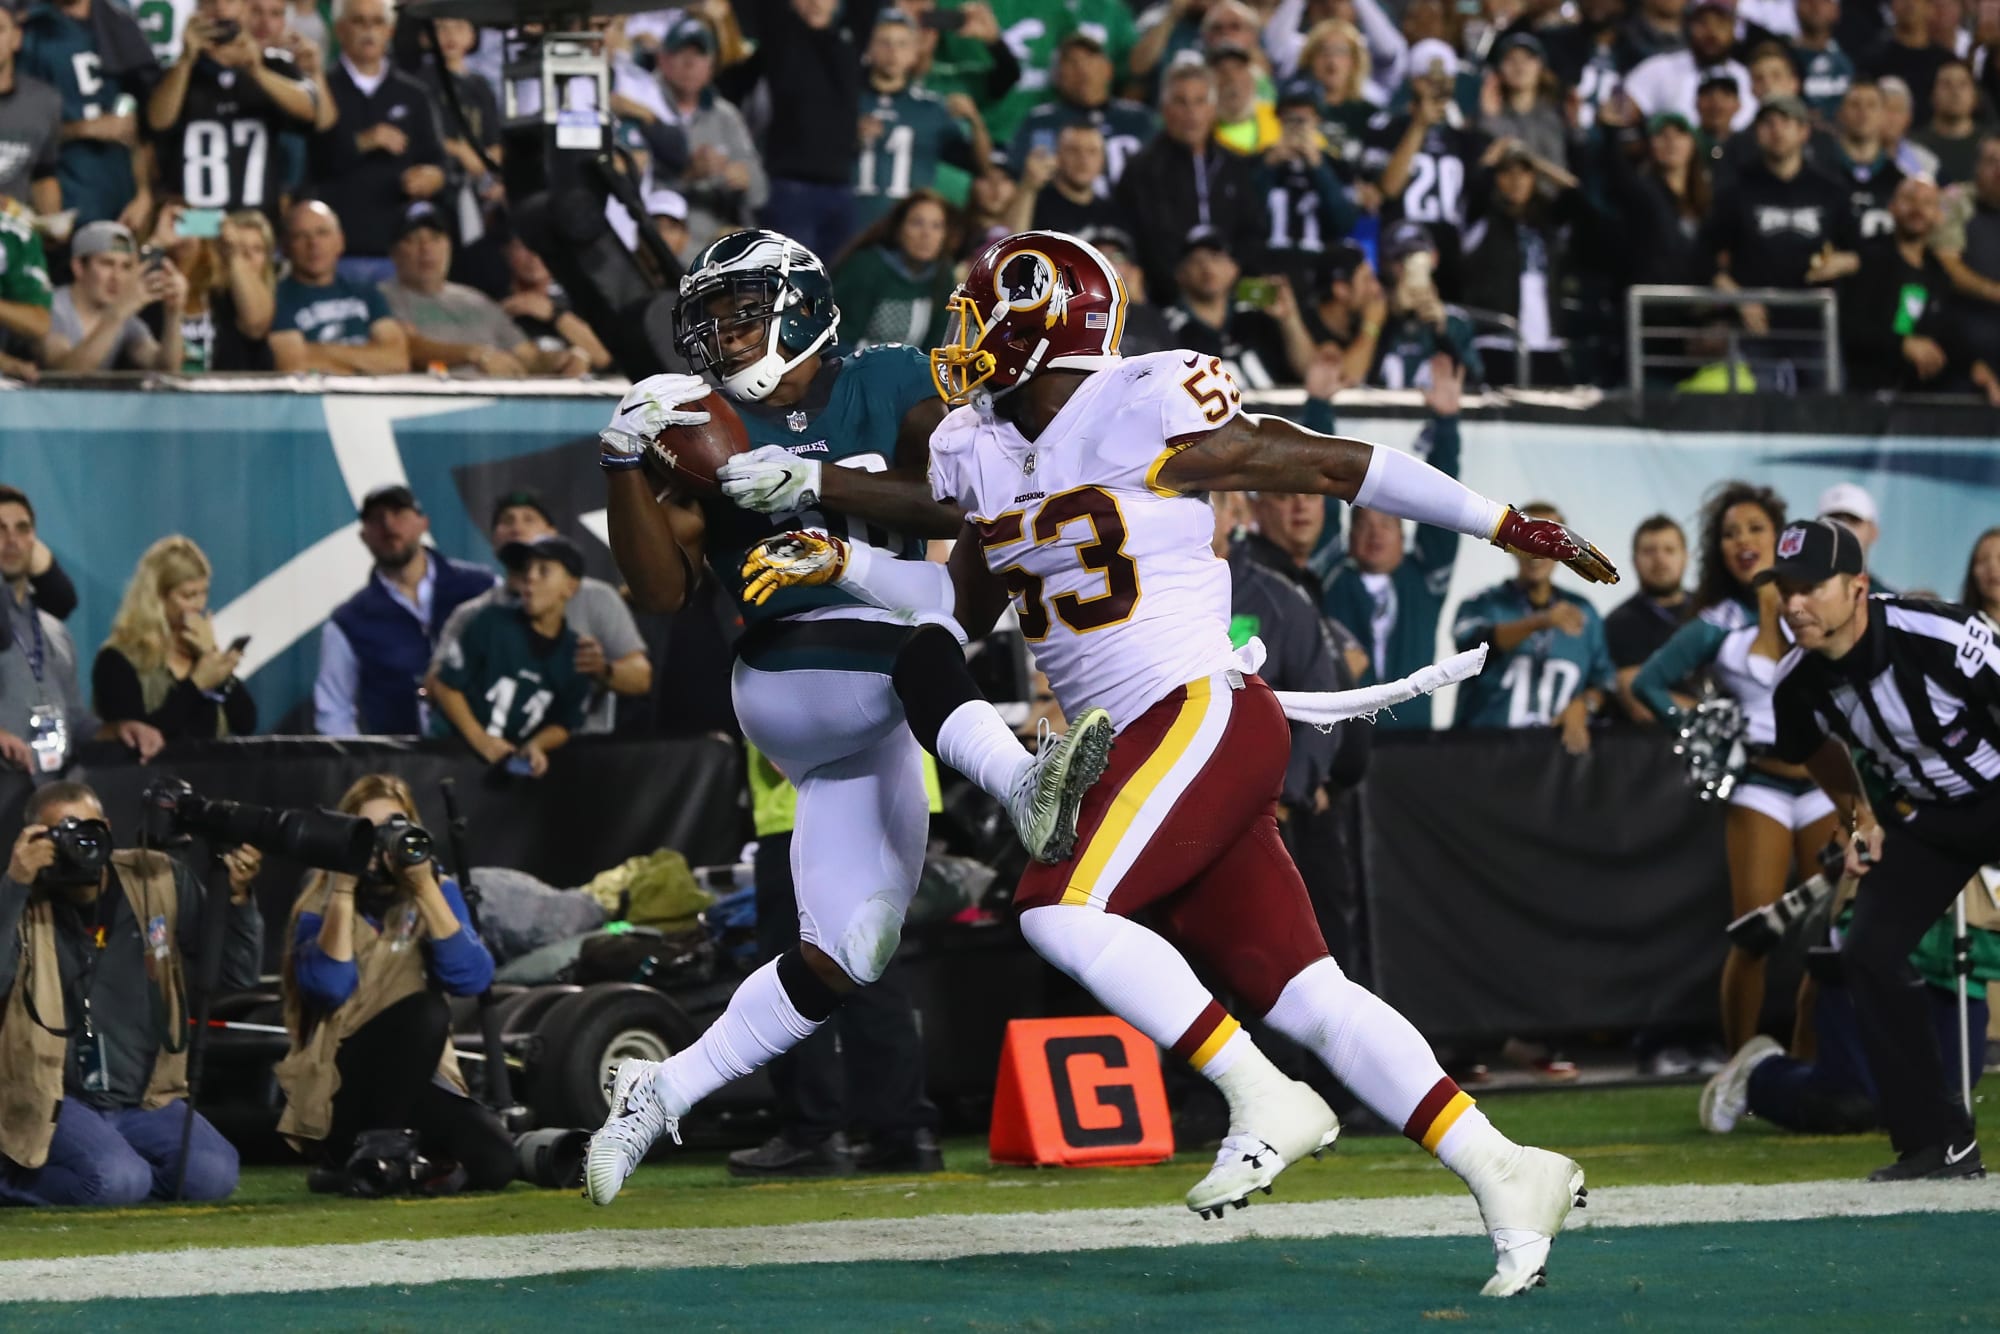 Redskins vs. Eagles Highlights, game tracker and more